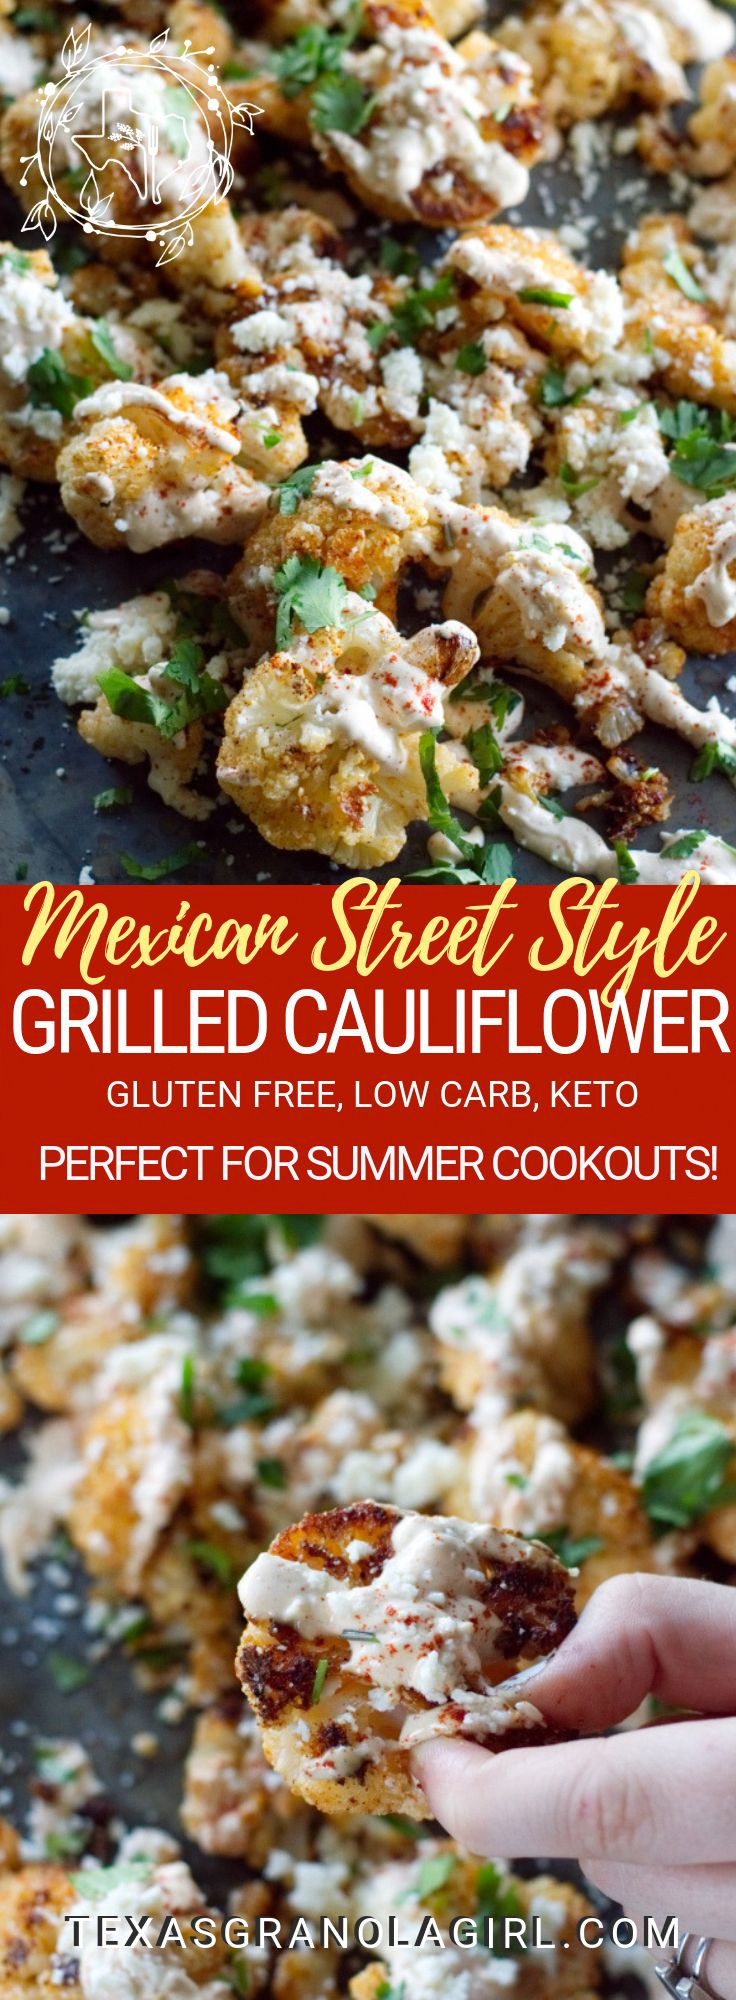 Mexican Street Cauliflower Keto
 This Mexican Street Style Grilled Cauliflower is this